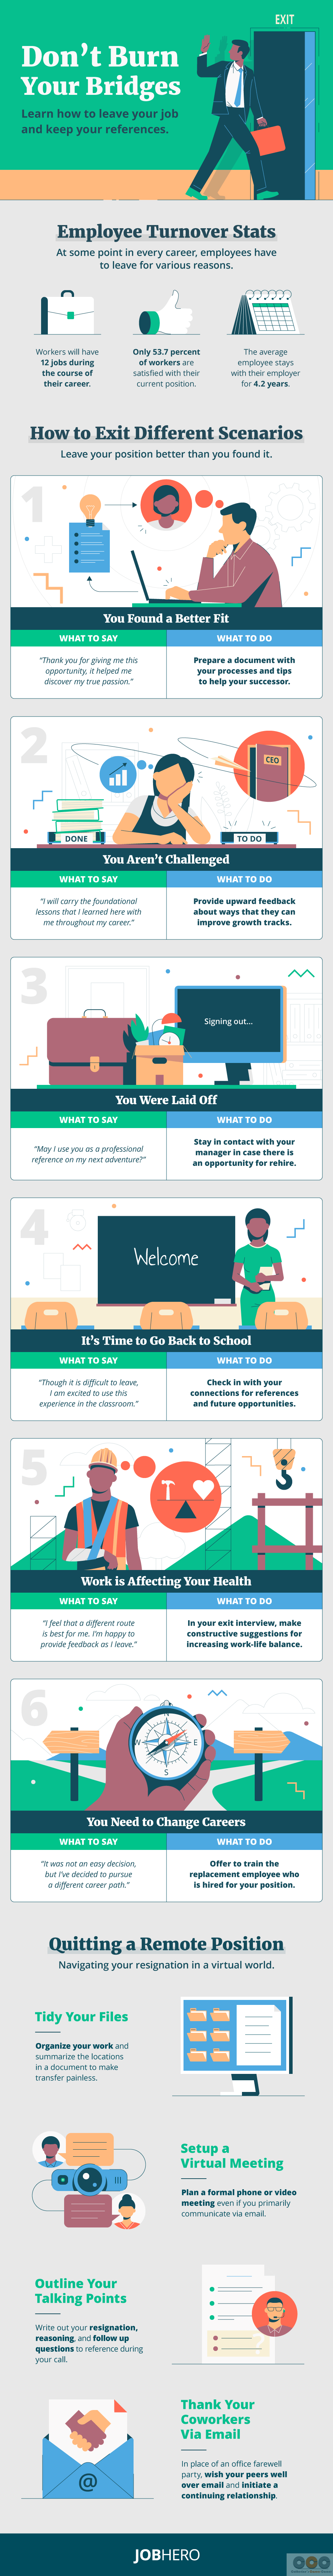 How to quit a job. 5 tips for doing it right._Infographic